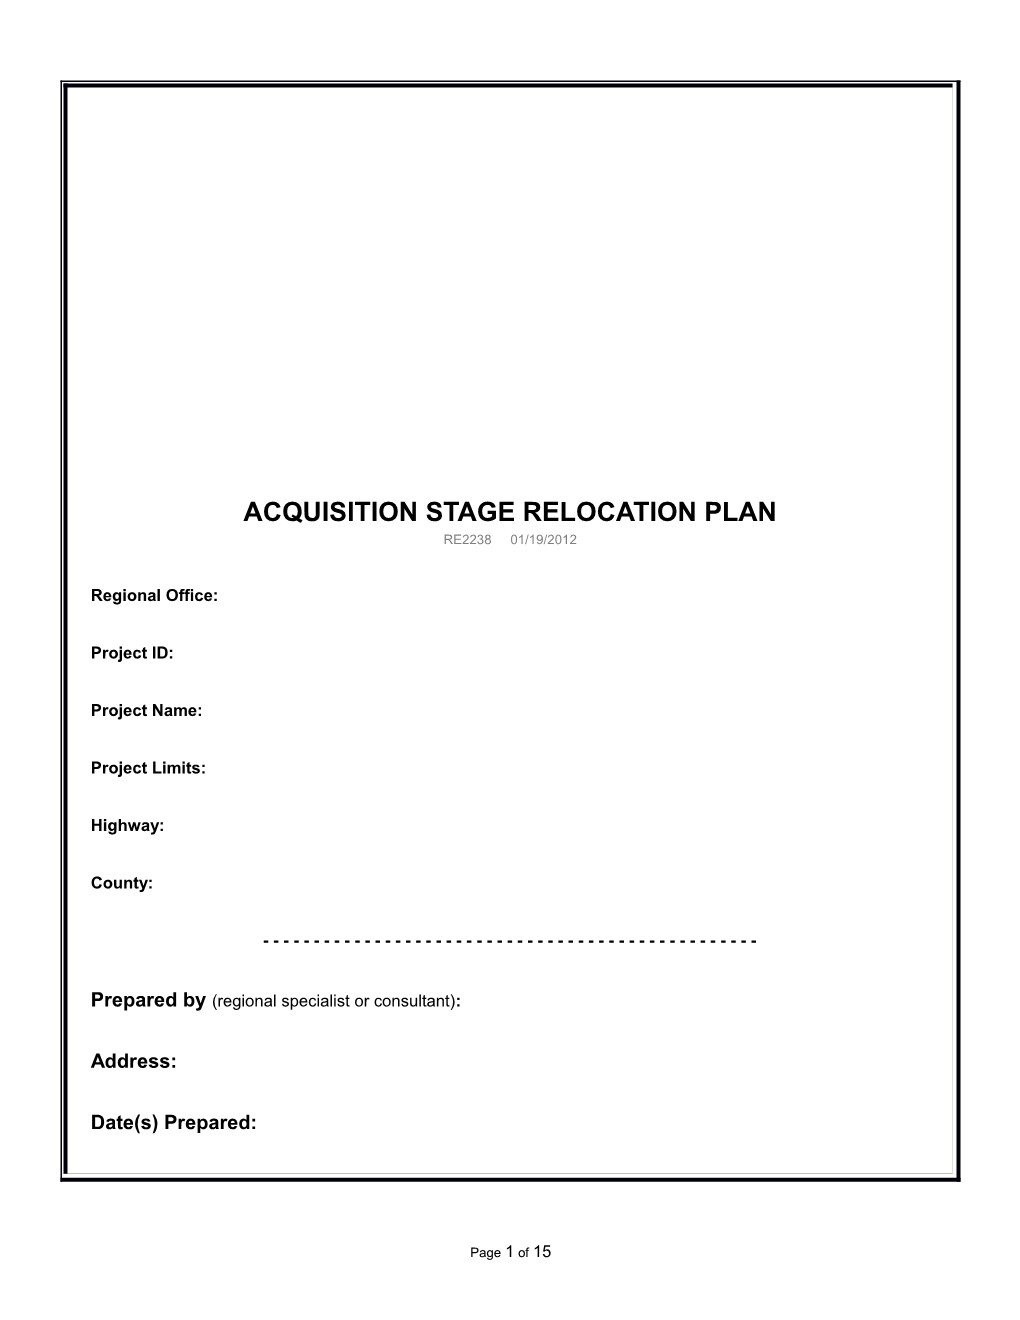 DT2238 - Acquisition Stage Relocation Plan